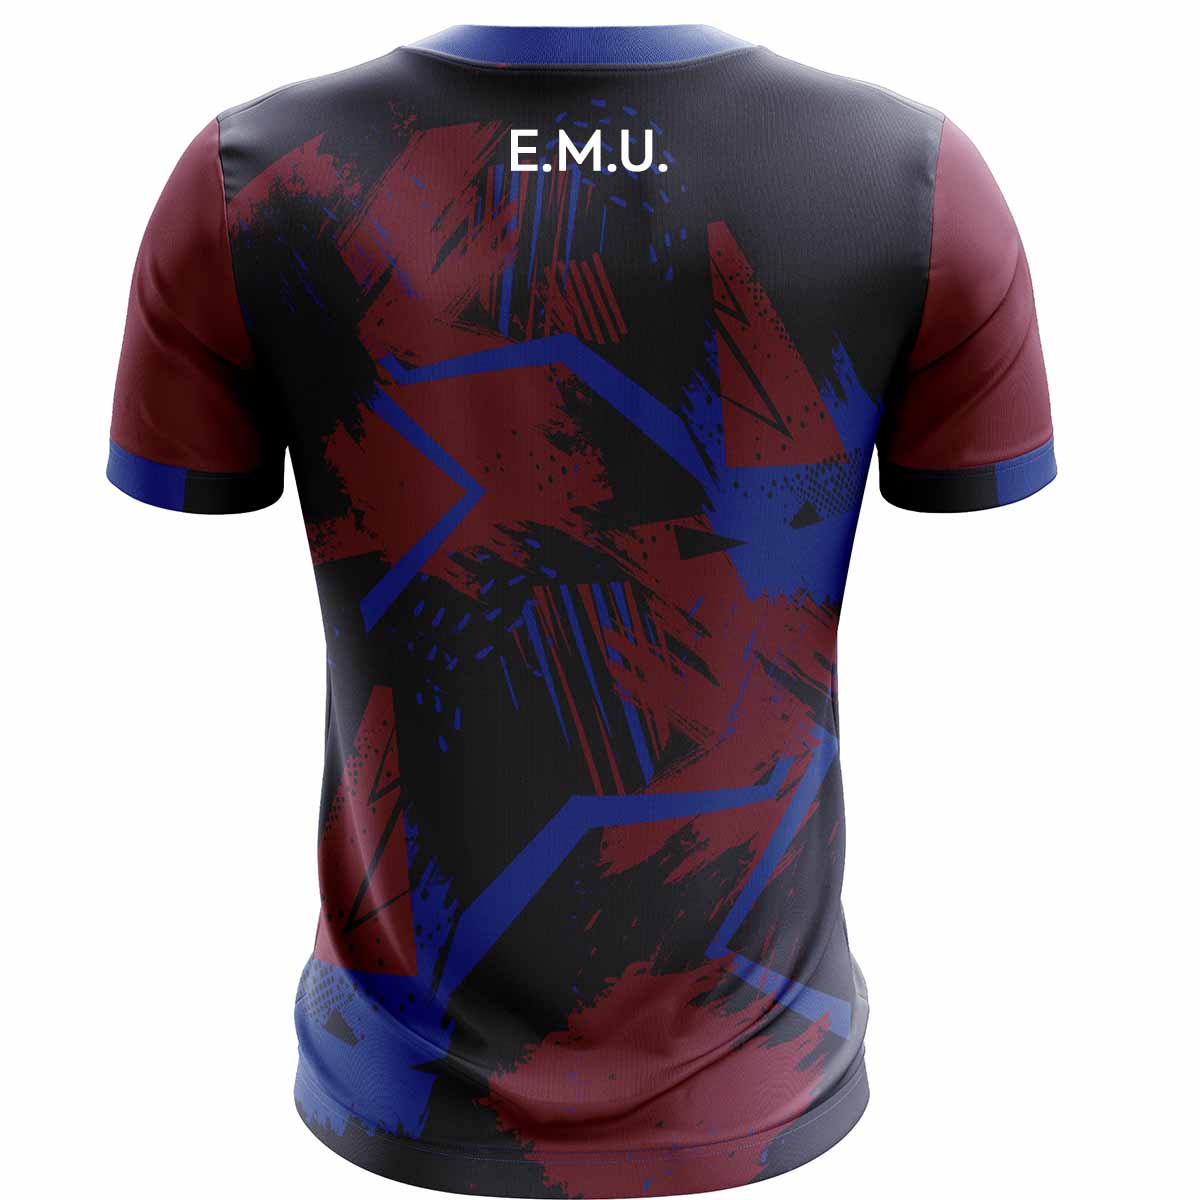 Mc Keever East Meath United FC Training Jersey - Adult - Navy/Maroon/Blue Player Fit